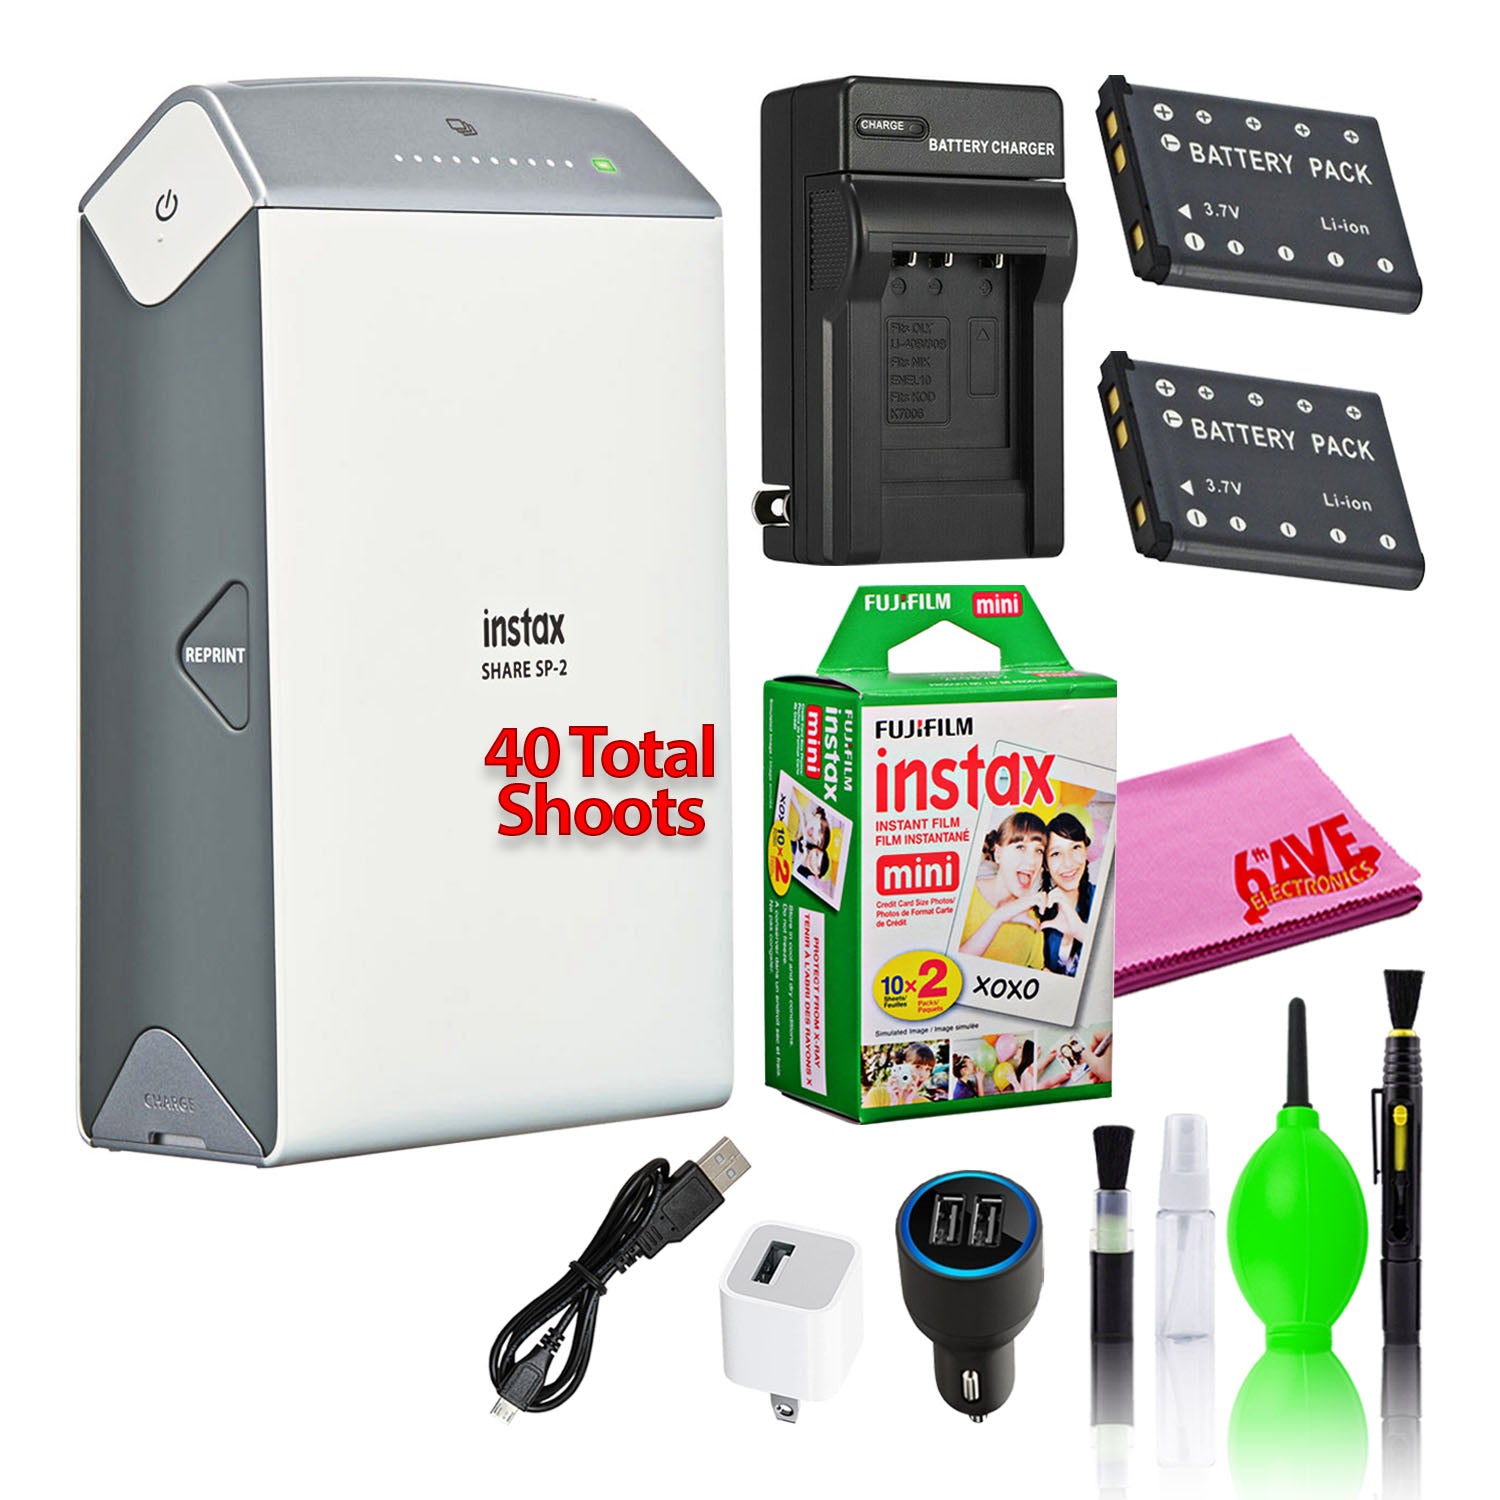 Fujifilm Instax Share SP-2 Smartphone Printer with (40) Films + Battery